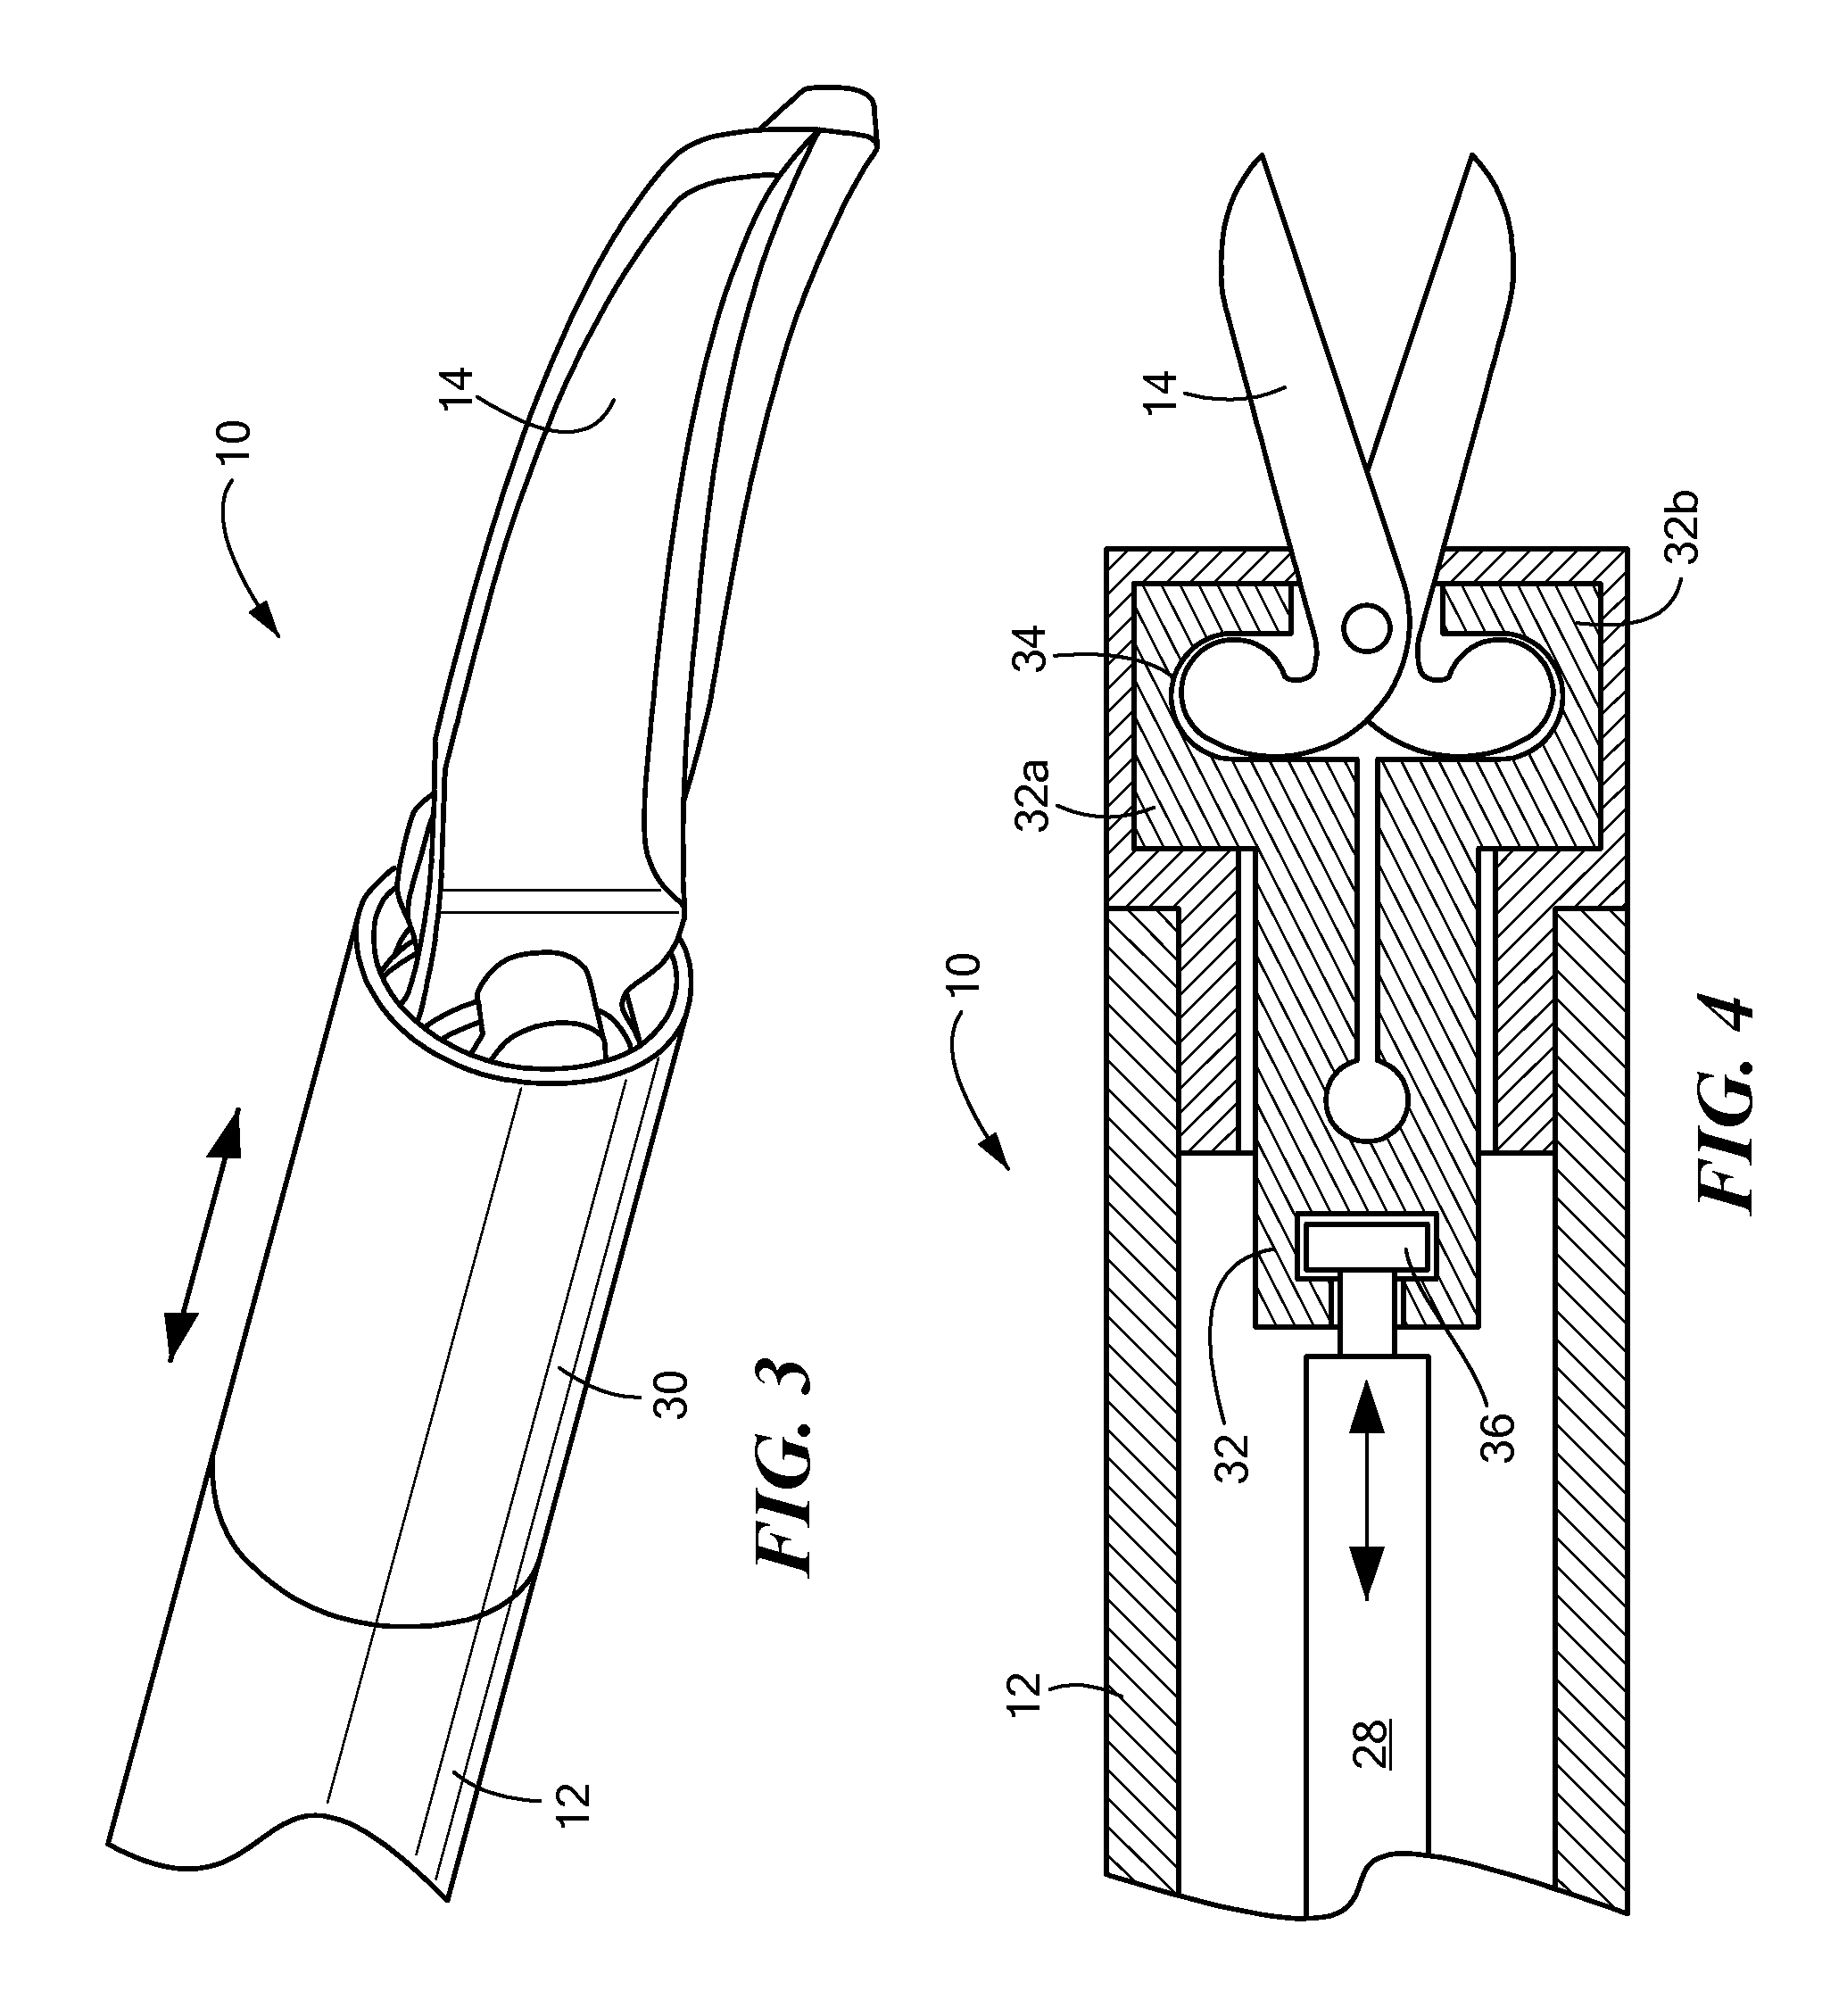 Instrument with removable tip